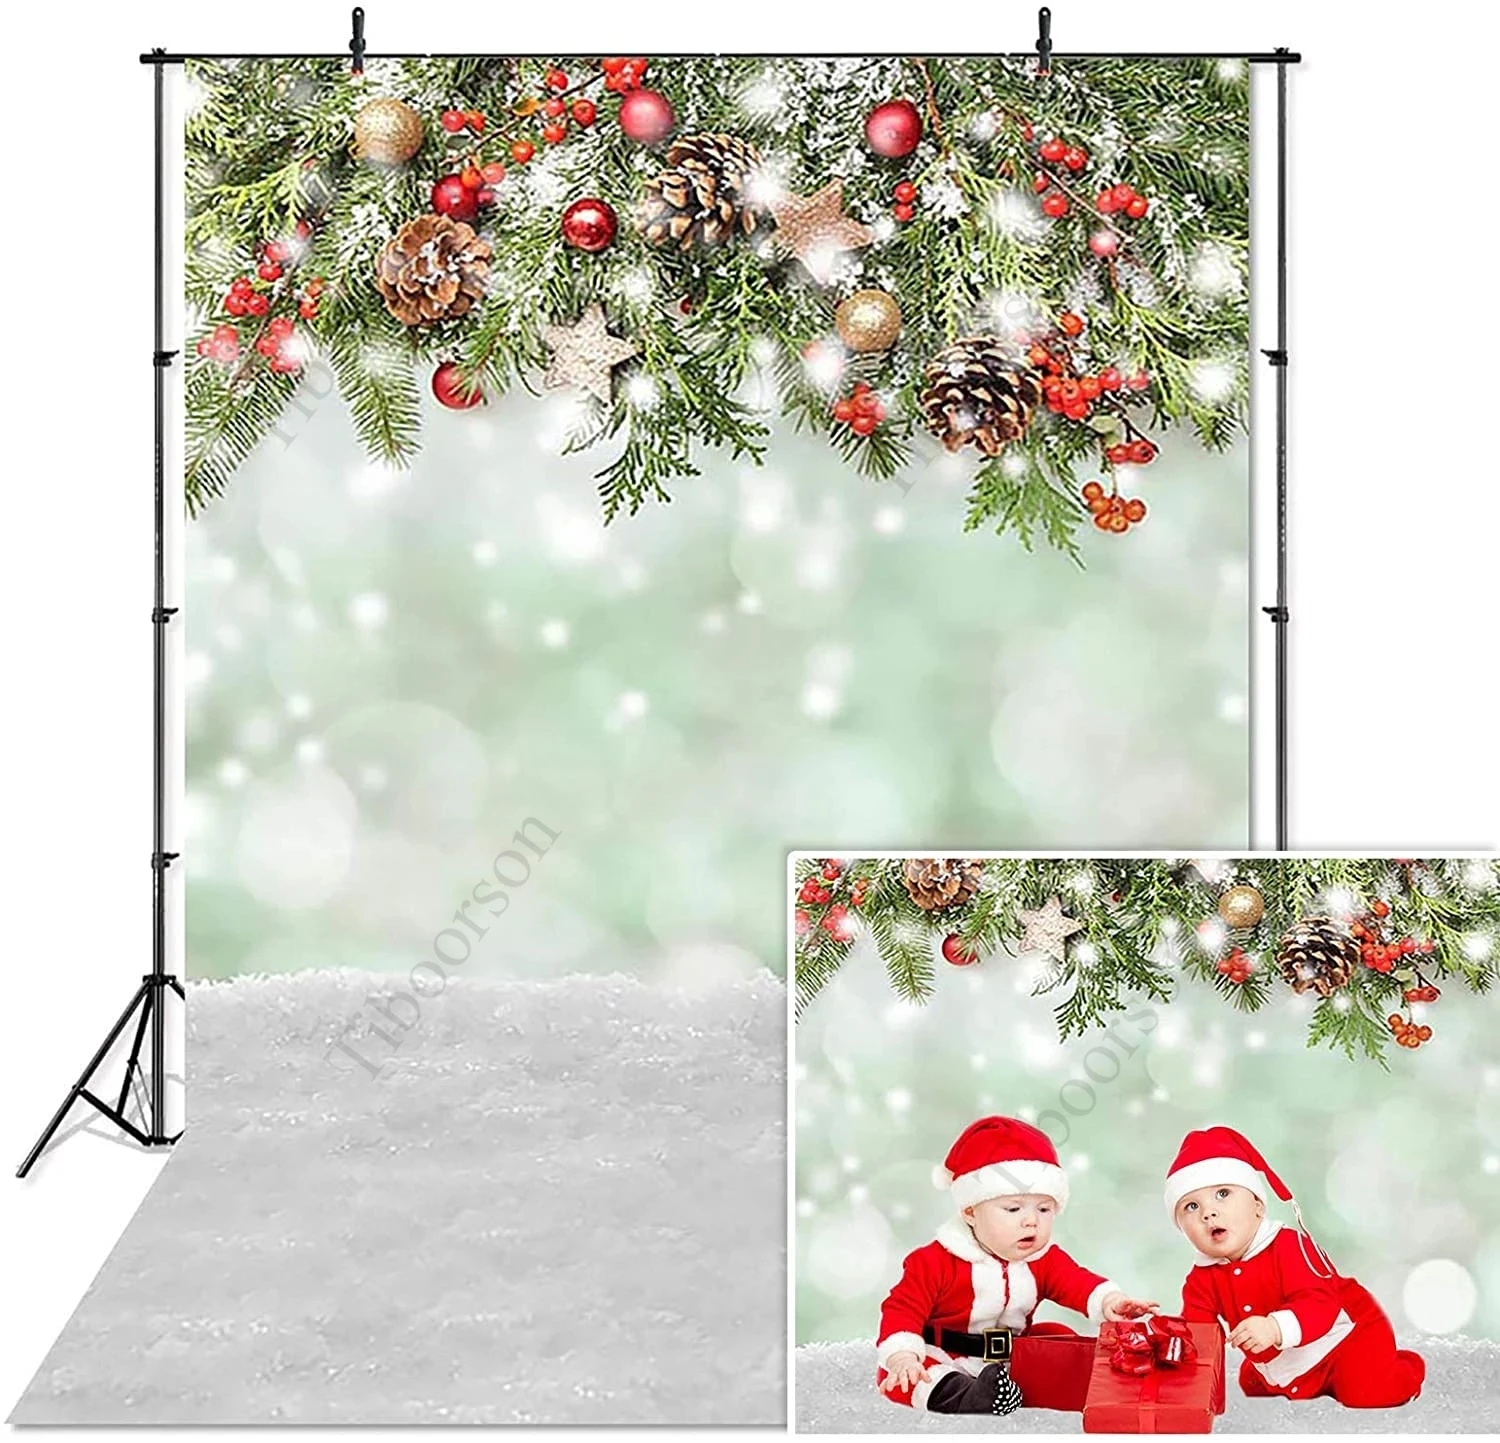 Christmas Background New Year Photography Backdrop Photo Booth Christmas Birthday Party Photo Background Photocall Studio Booth